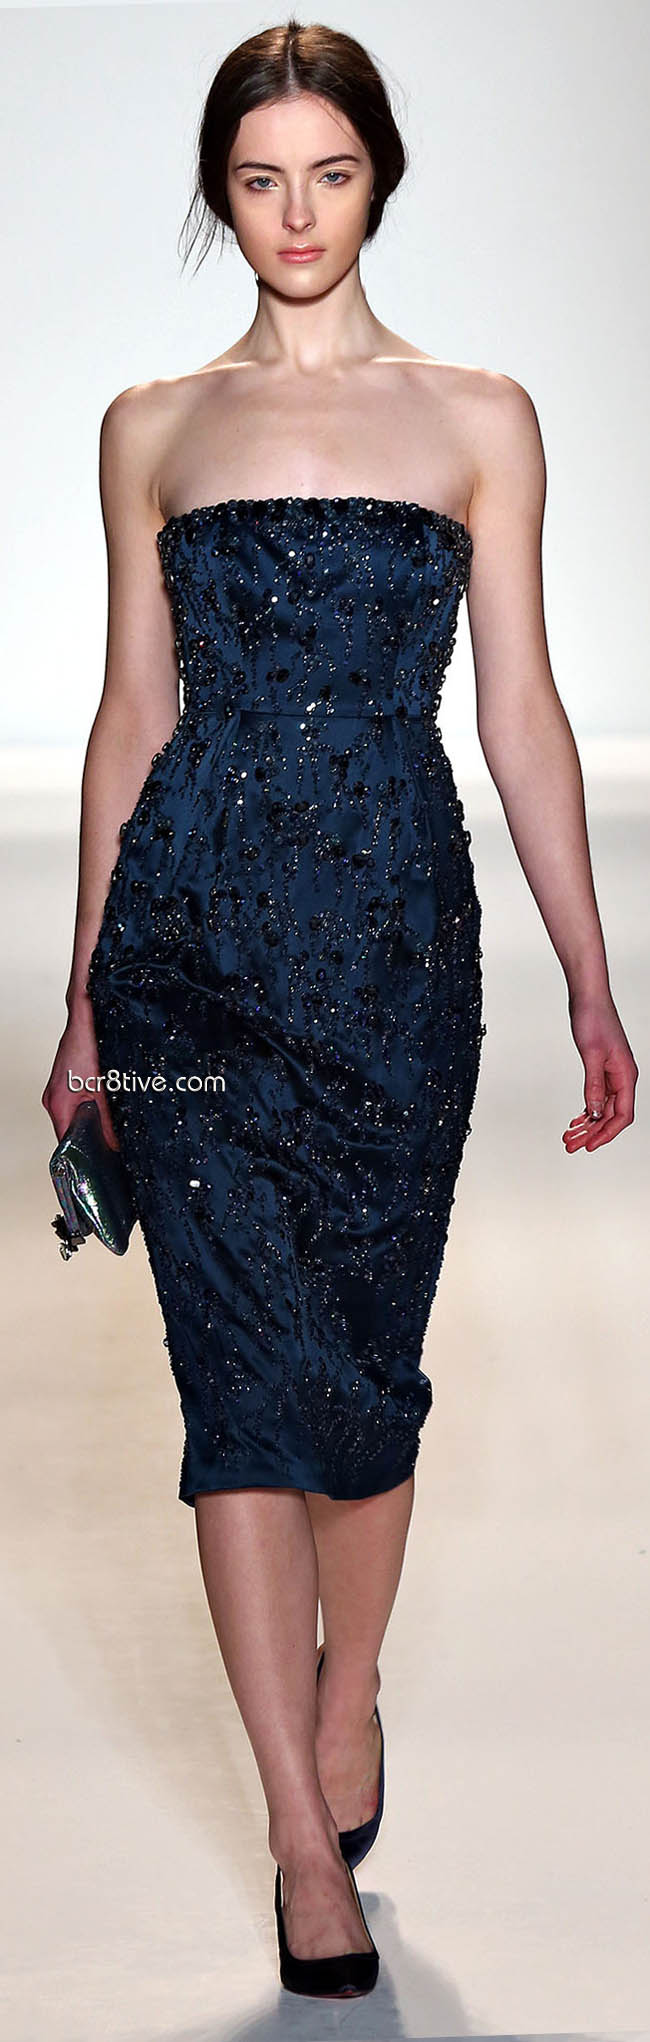 Jenny Packham Fall 2013 Ready to Wear Collection at New York Fashion Week